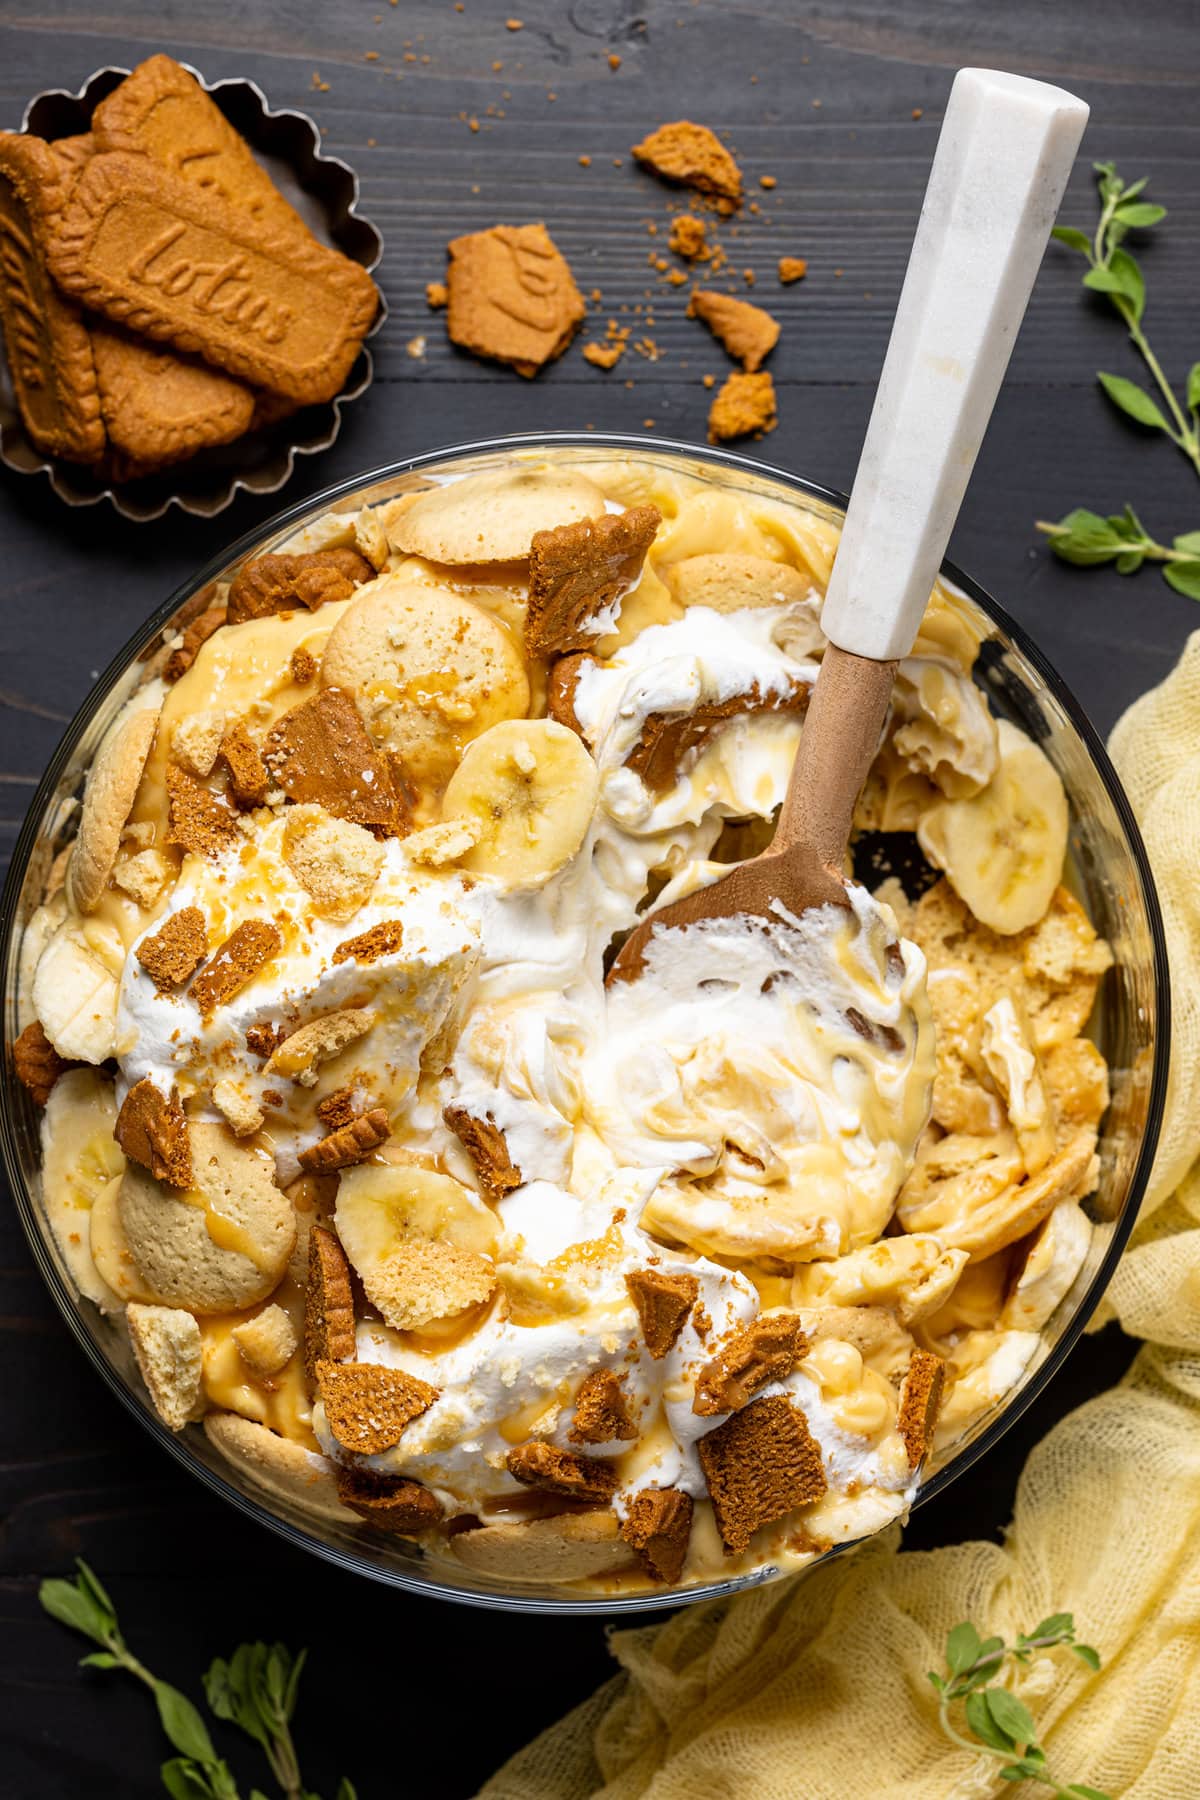 Biscoff Banana Pudding with Caramel being served with a spoon